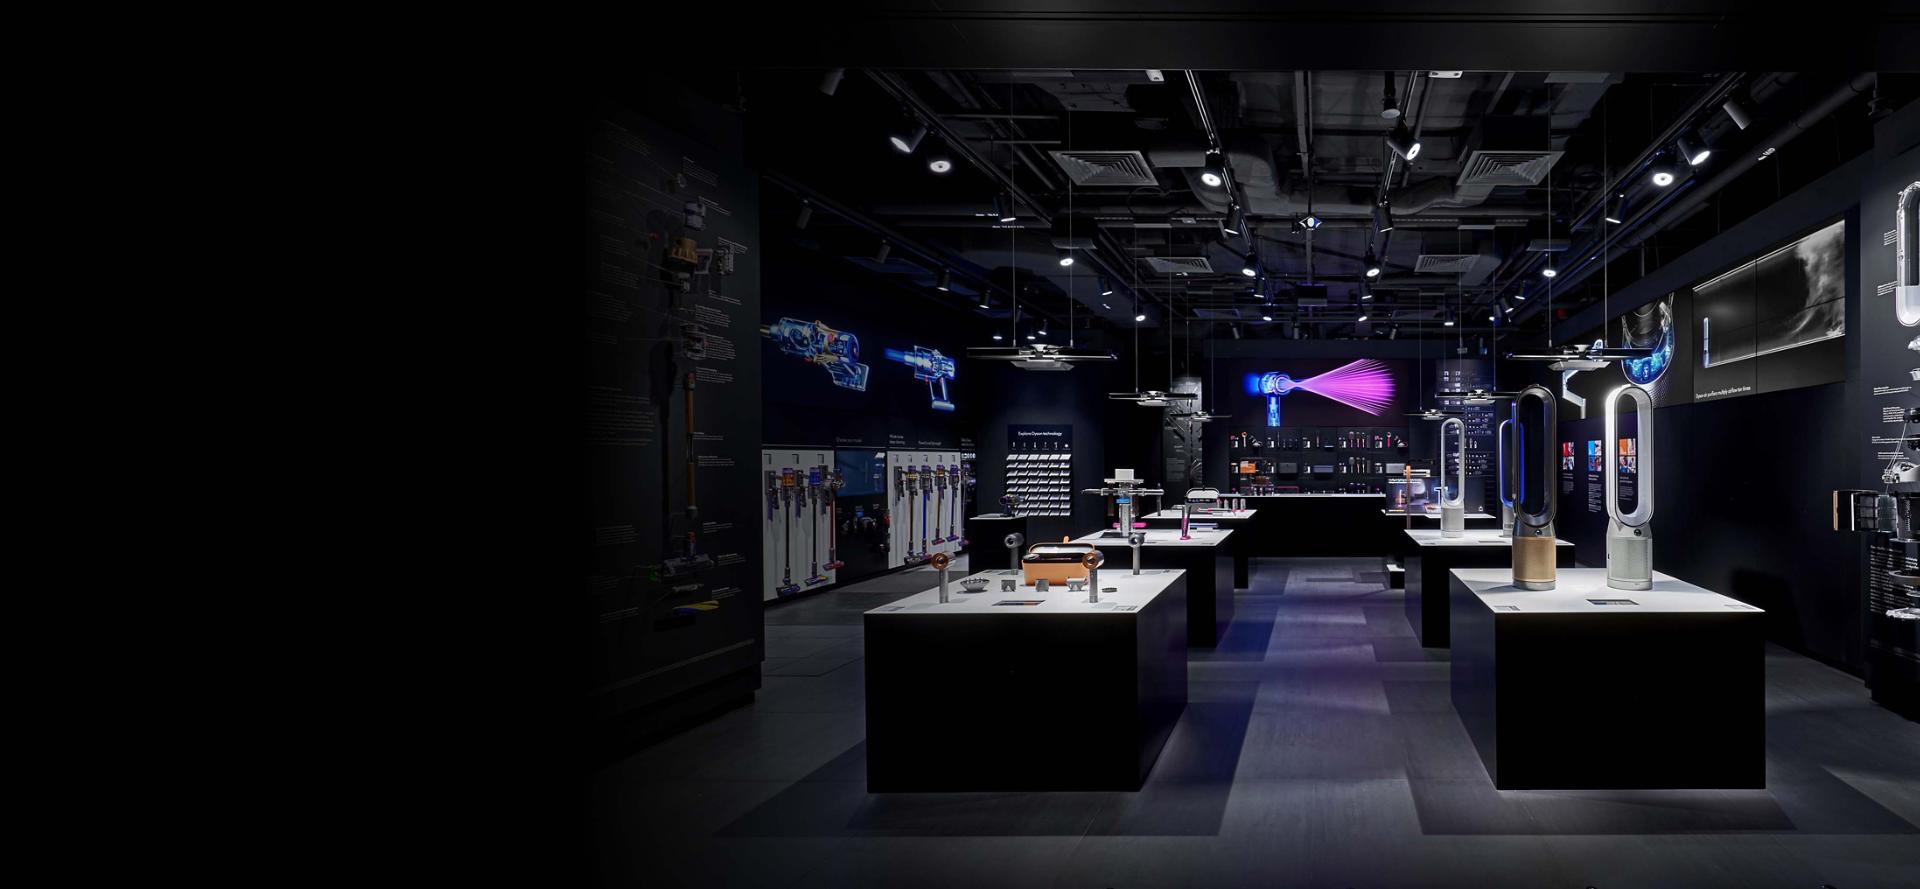 Dyson Demo store with Dyson machines on display